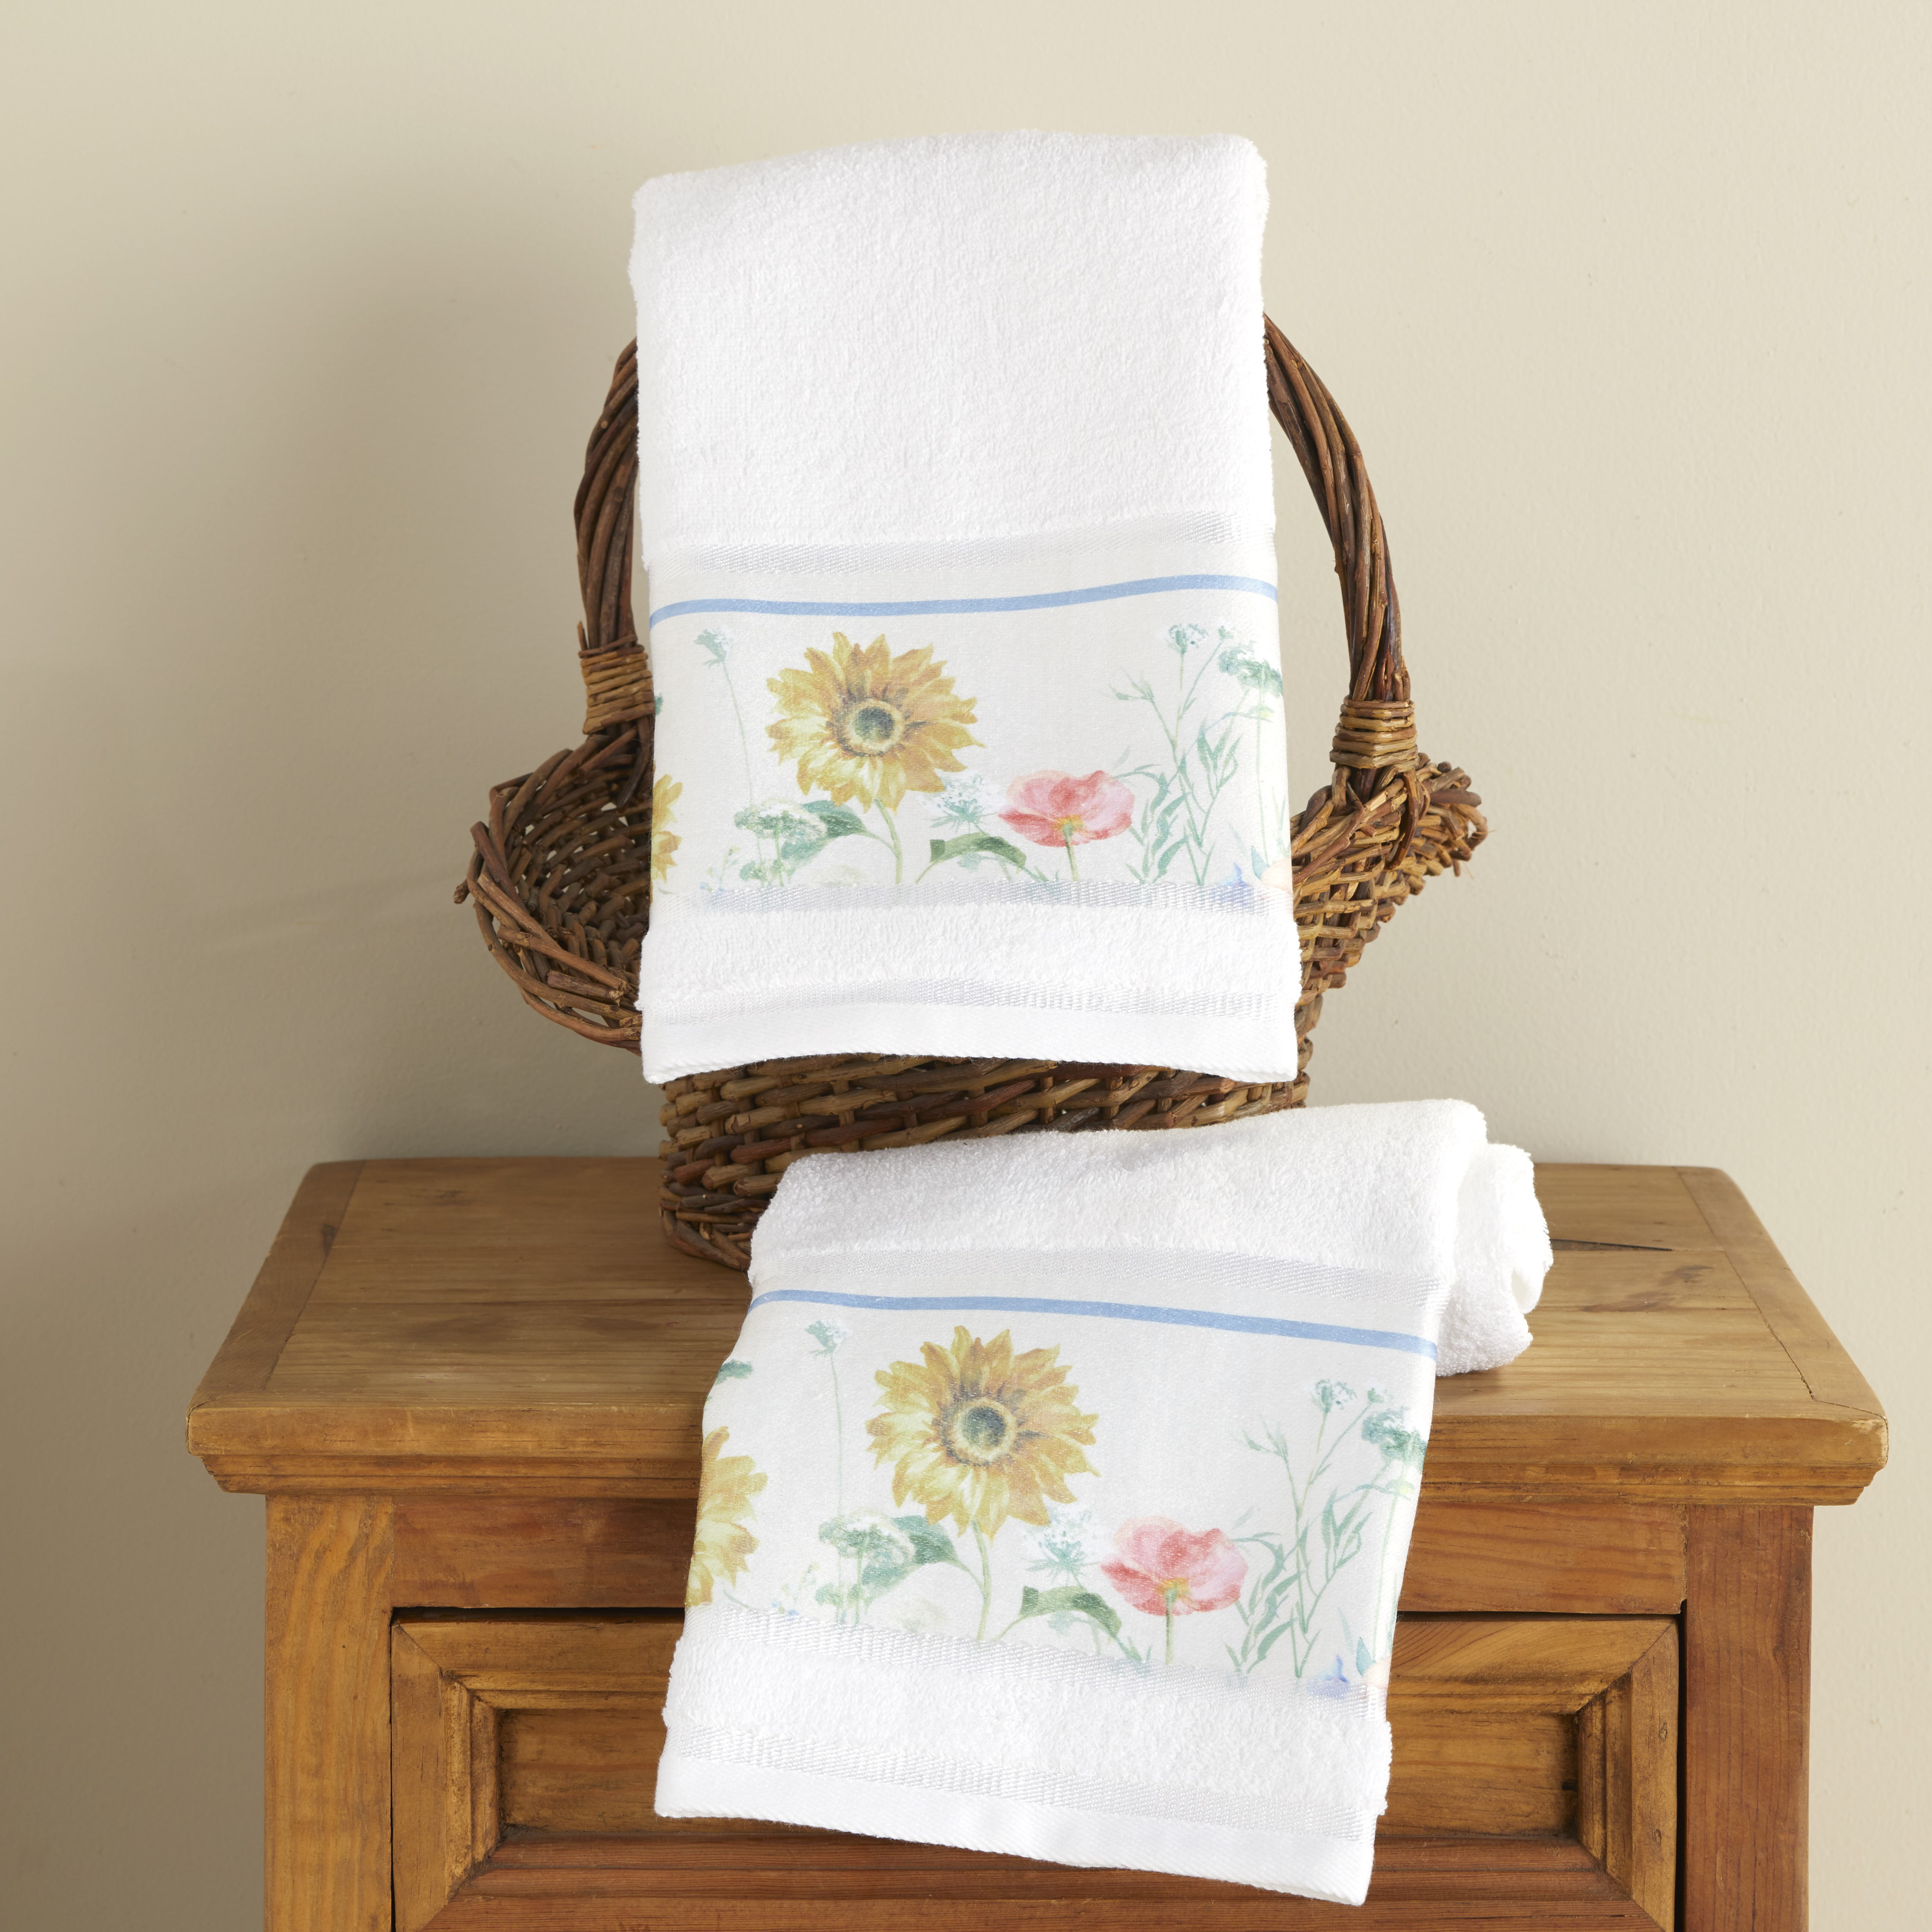 2 Blessed Wreath Home Kitchen Dish Towels  ~100% Cotton Best Selling 